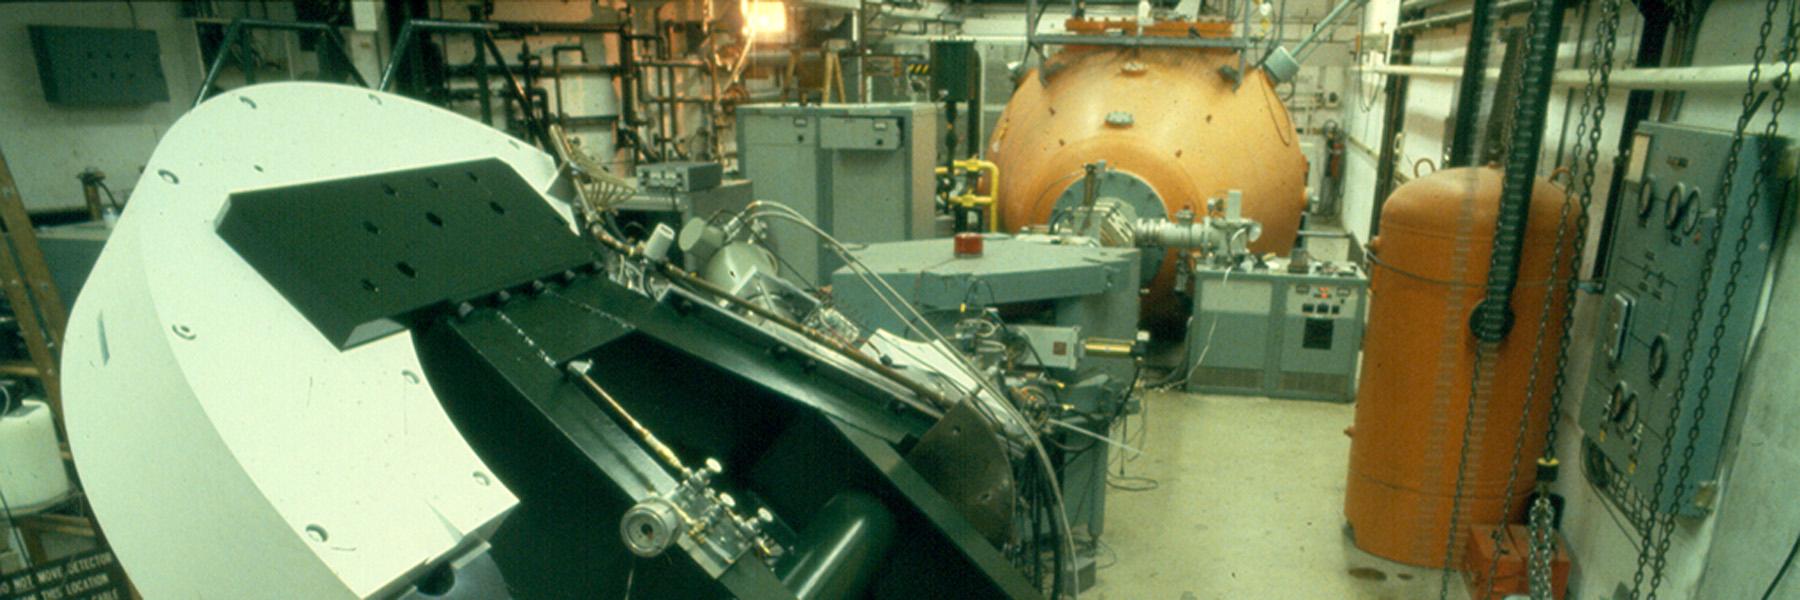 Edwards Accelerator and beam swinger in lab